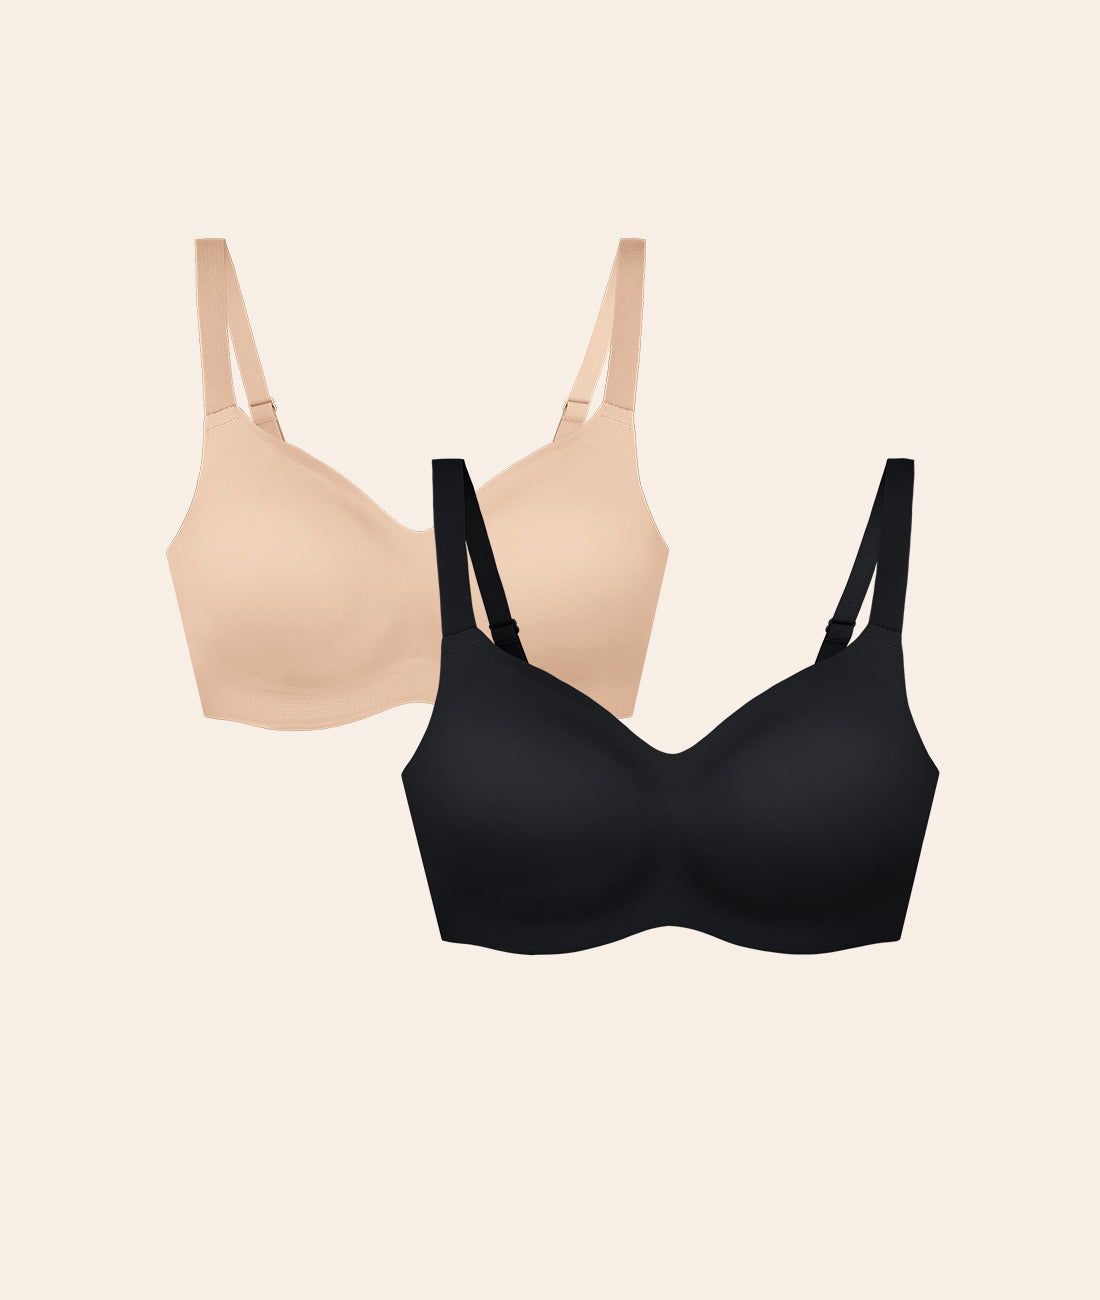 I'm loving this new Essentials Smoothing Comfort Wireless Bra! The